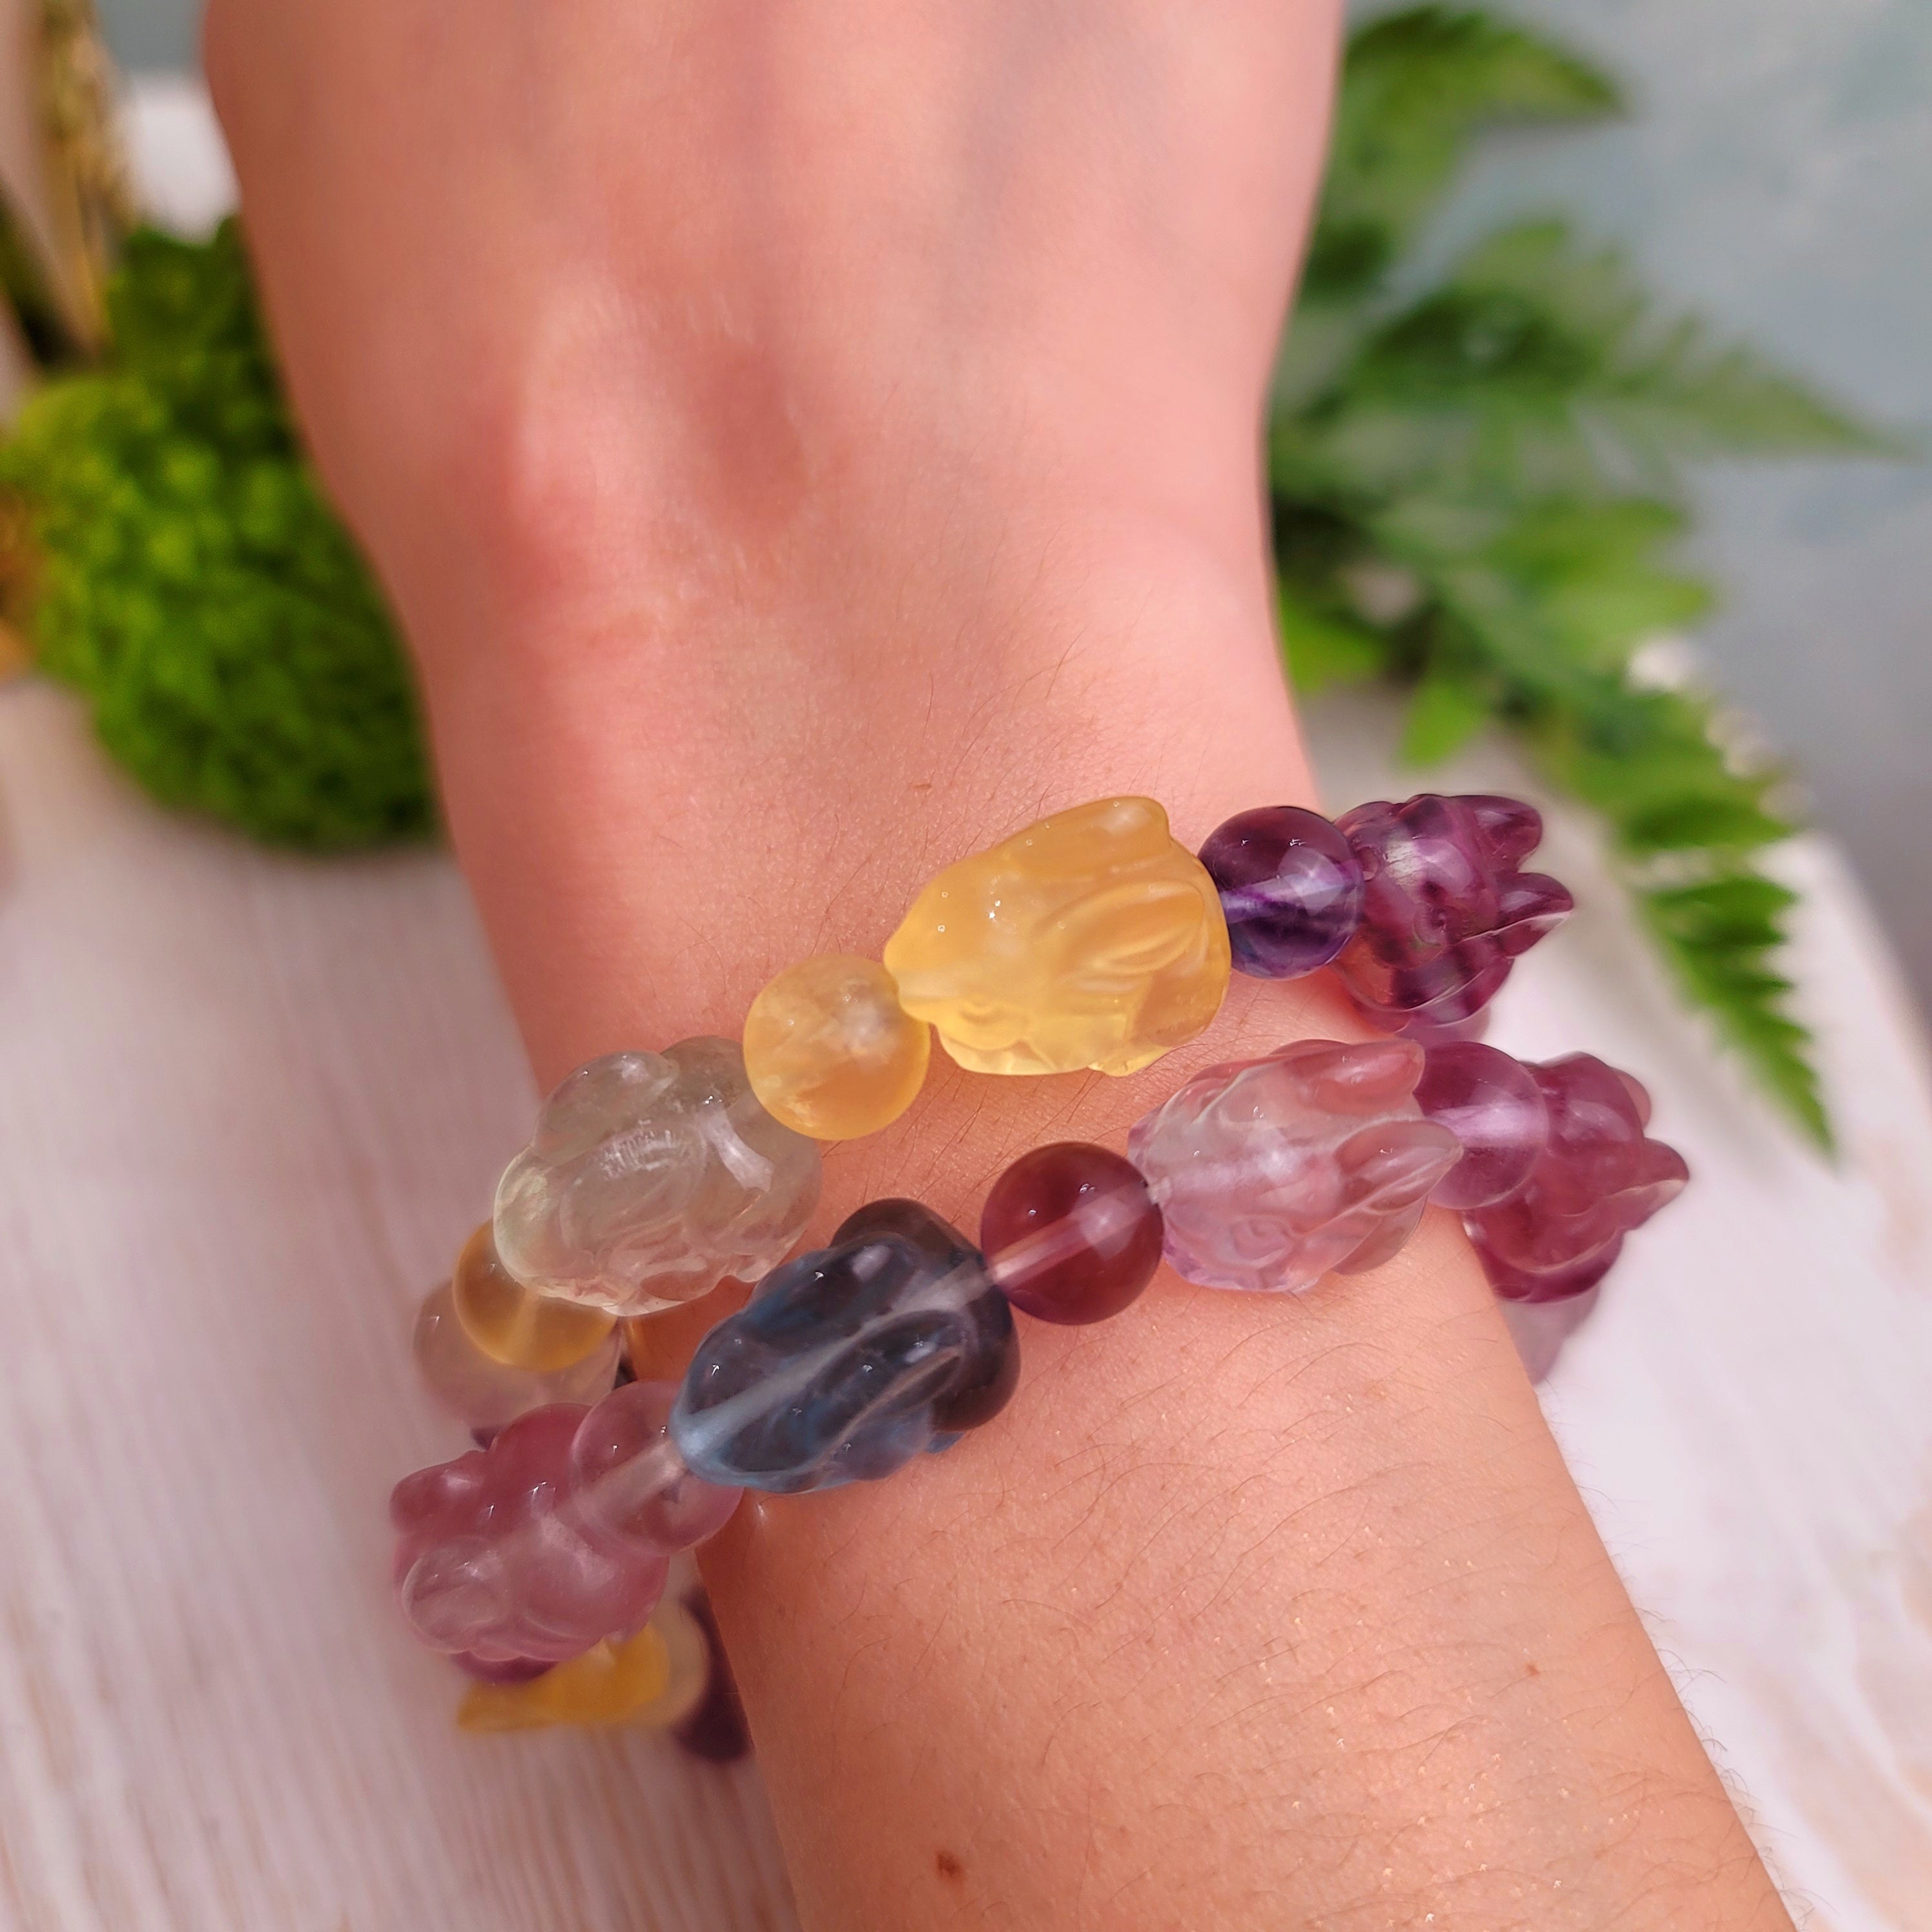 Fluorite Bunny Bracelet for Focus and Mental Clarity